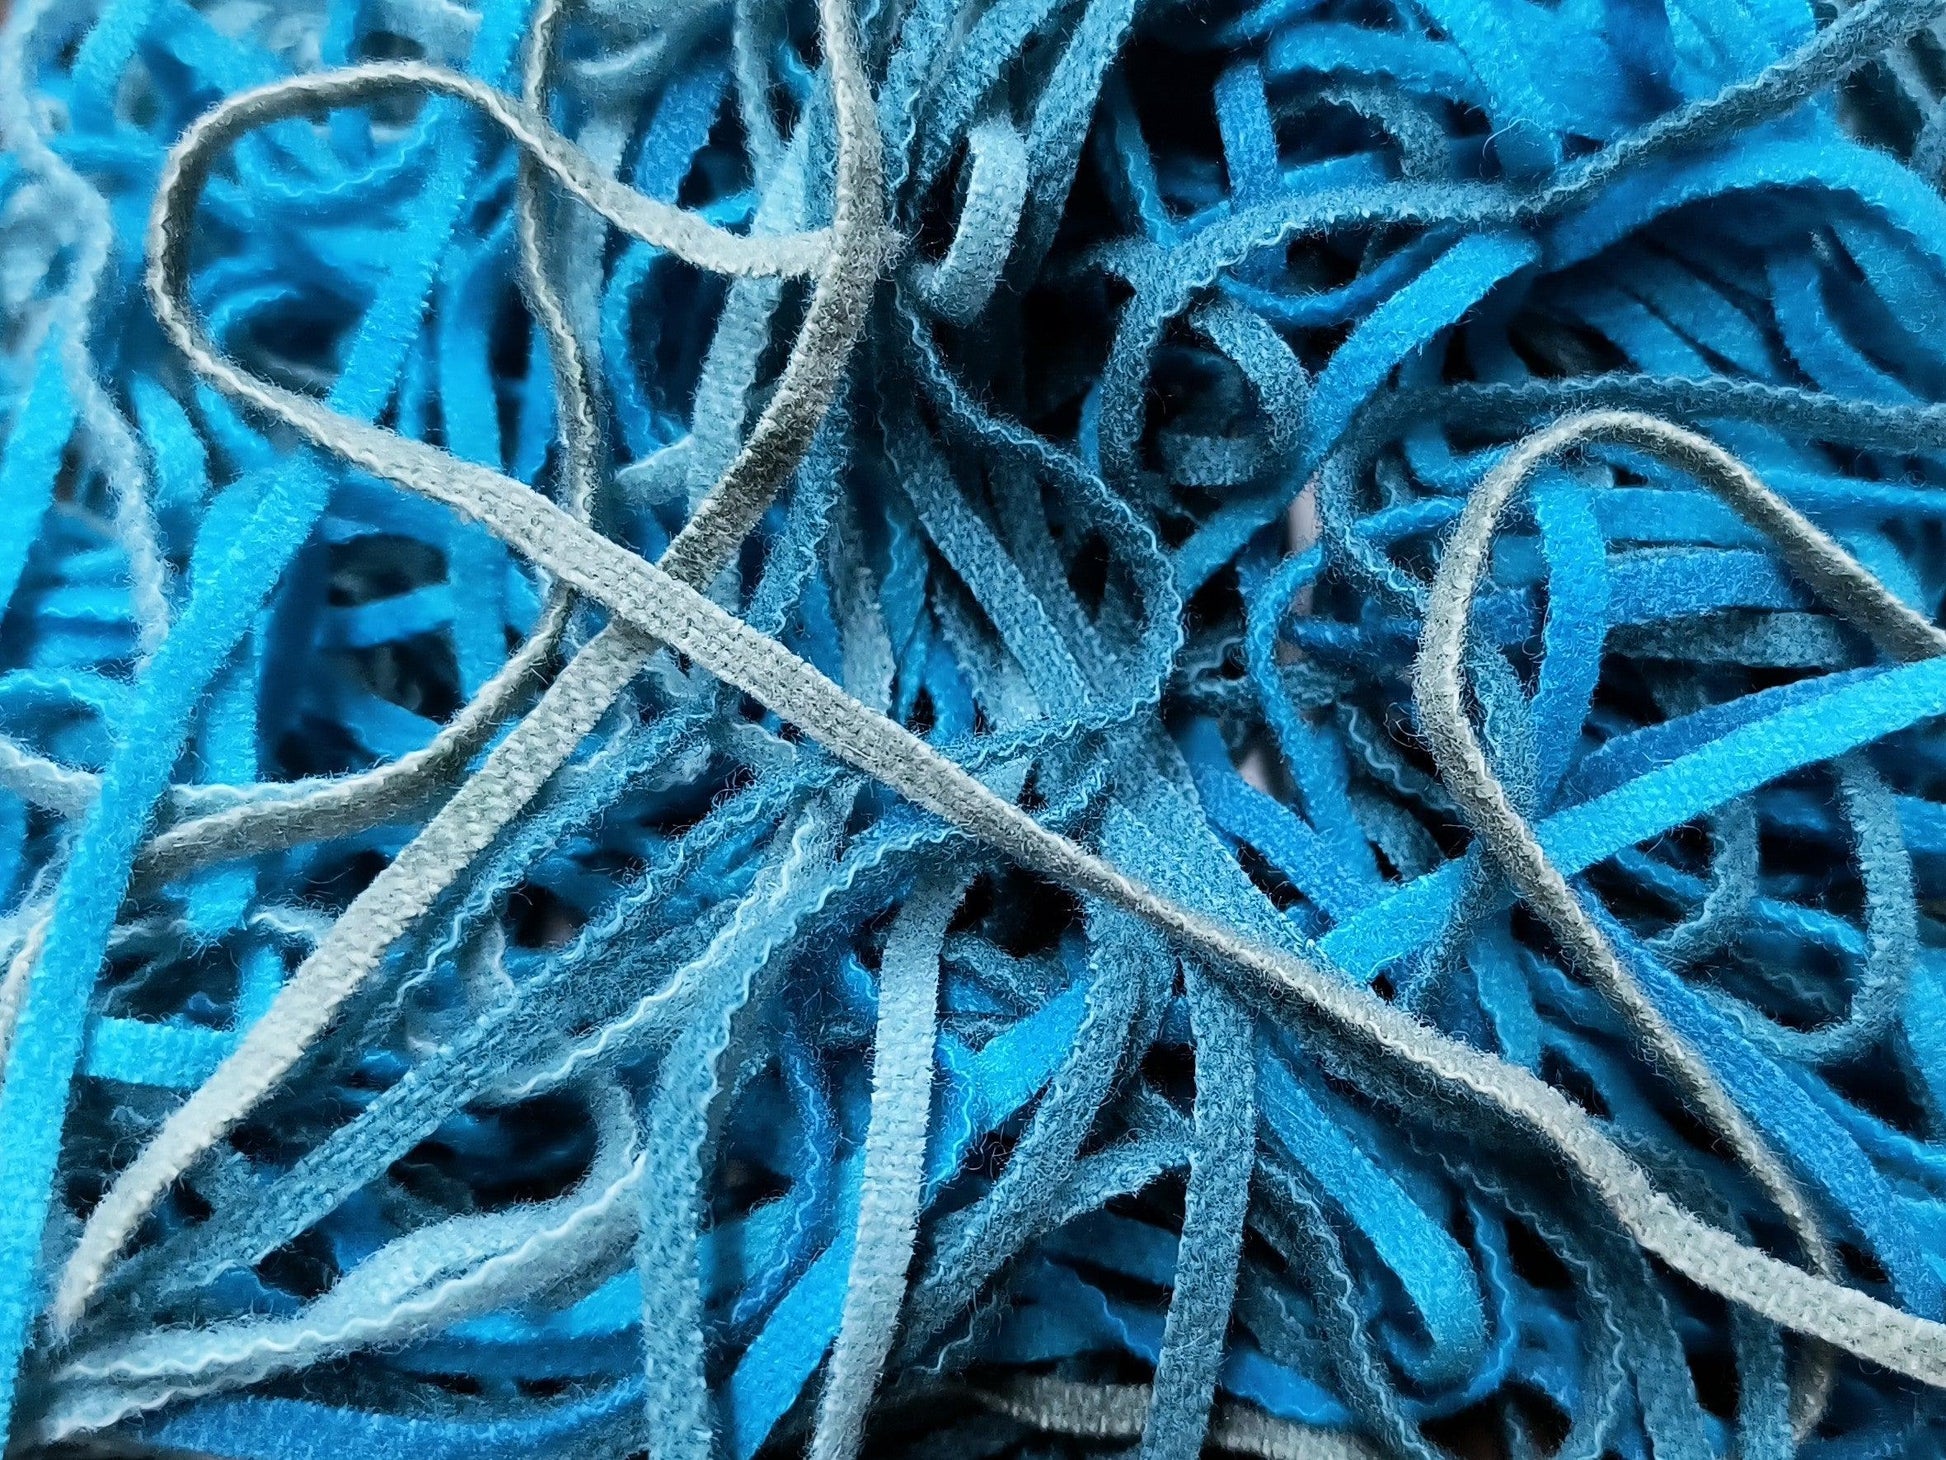 Long Pre-Cut Mixed Turquoise 2oz Bundle Hand Dyed Wool Strips - All About Ewe Wool Shop